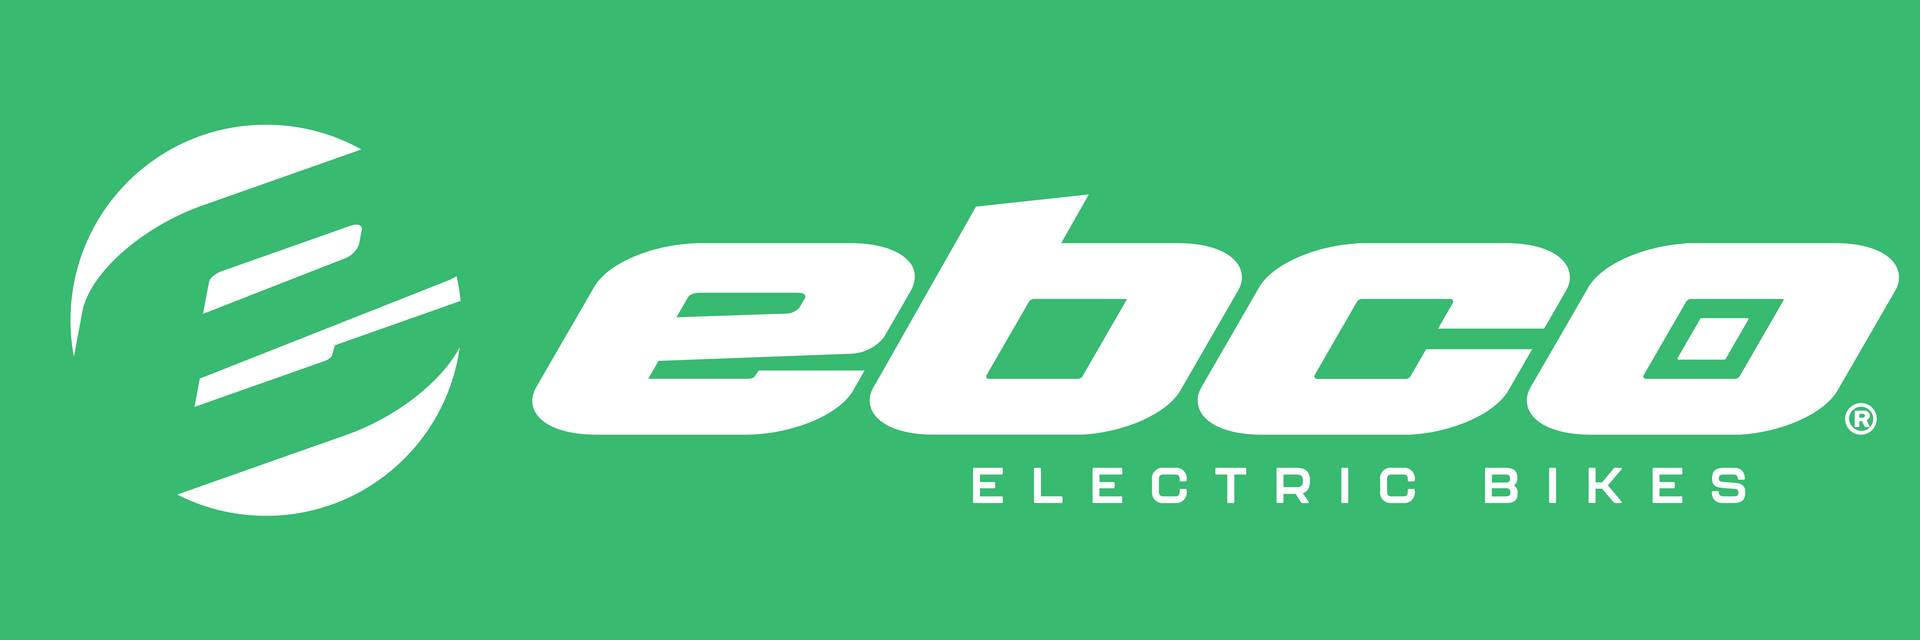 EBCO logo. White letters and graphic on green background